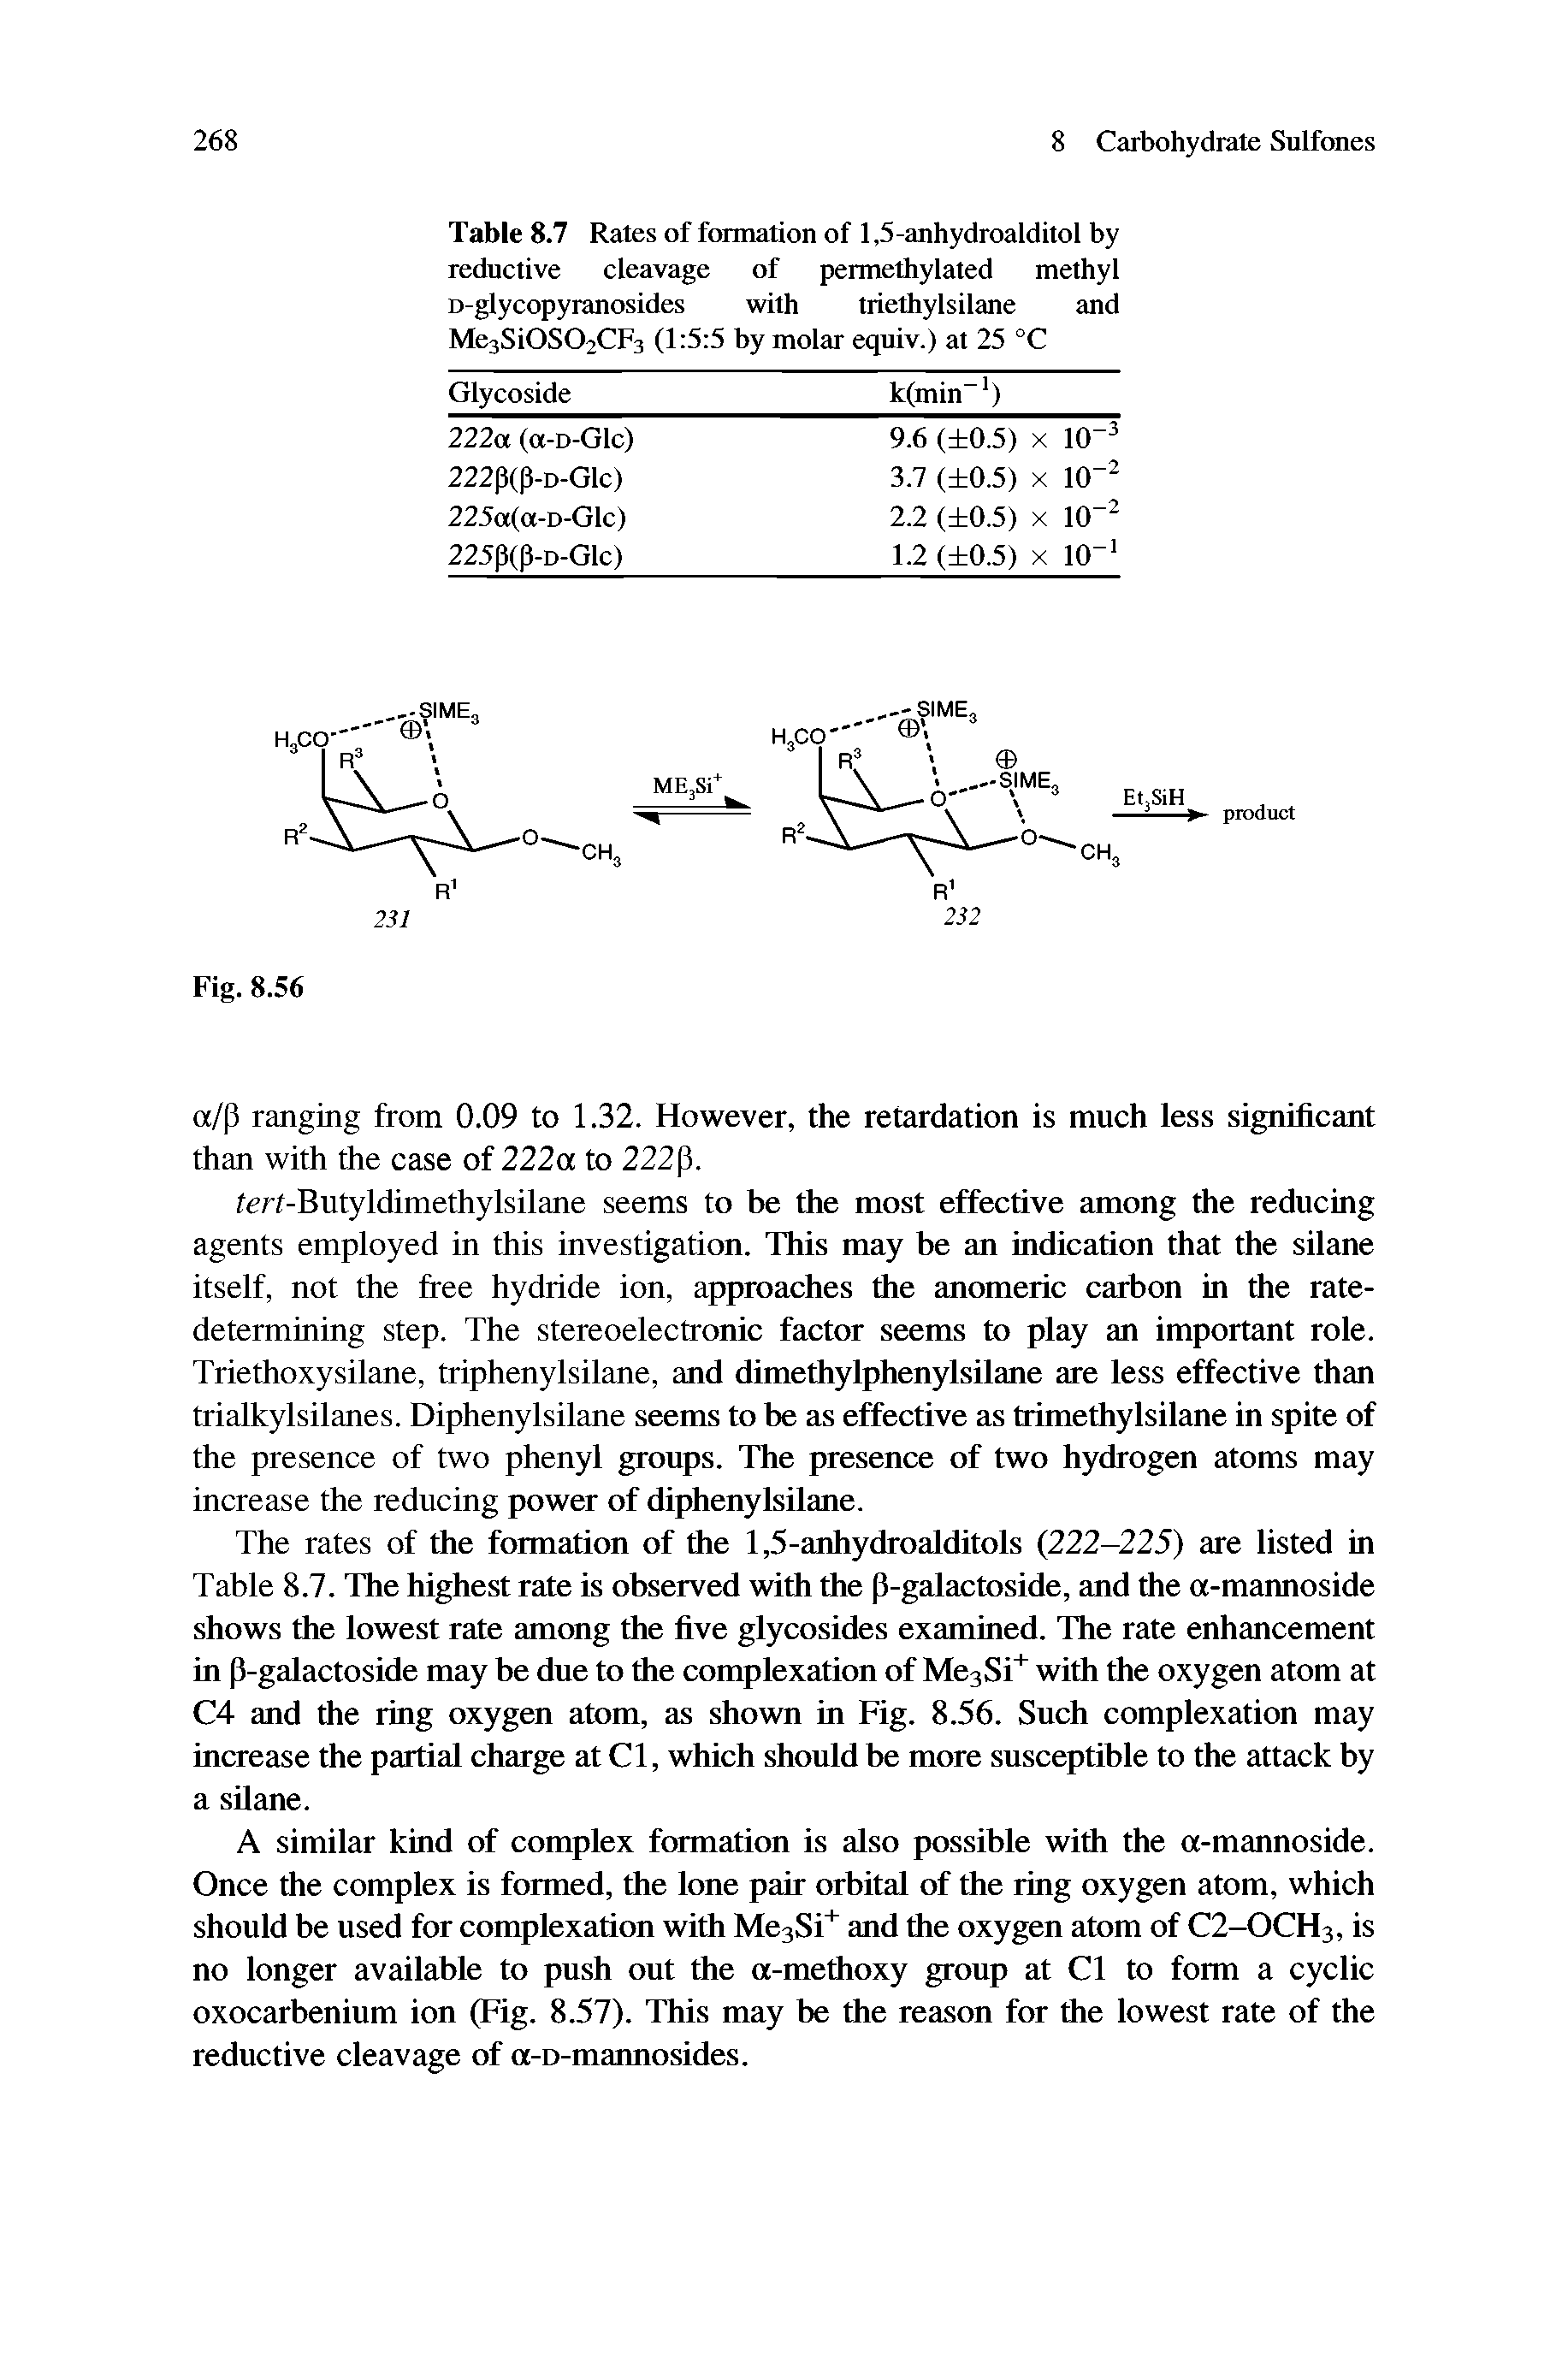 Table 8.7 Rates of formation of 1,5-anhydroalditol by reductive cleavage of permethylated methyl D-glycopyranosides with triethylsilane and Me3Si0S02CF3 (1 5 5 by molar equiv.) at 25 °C...